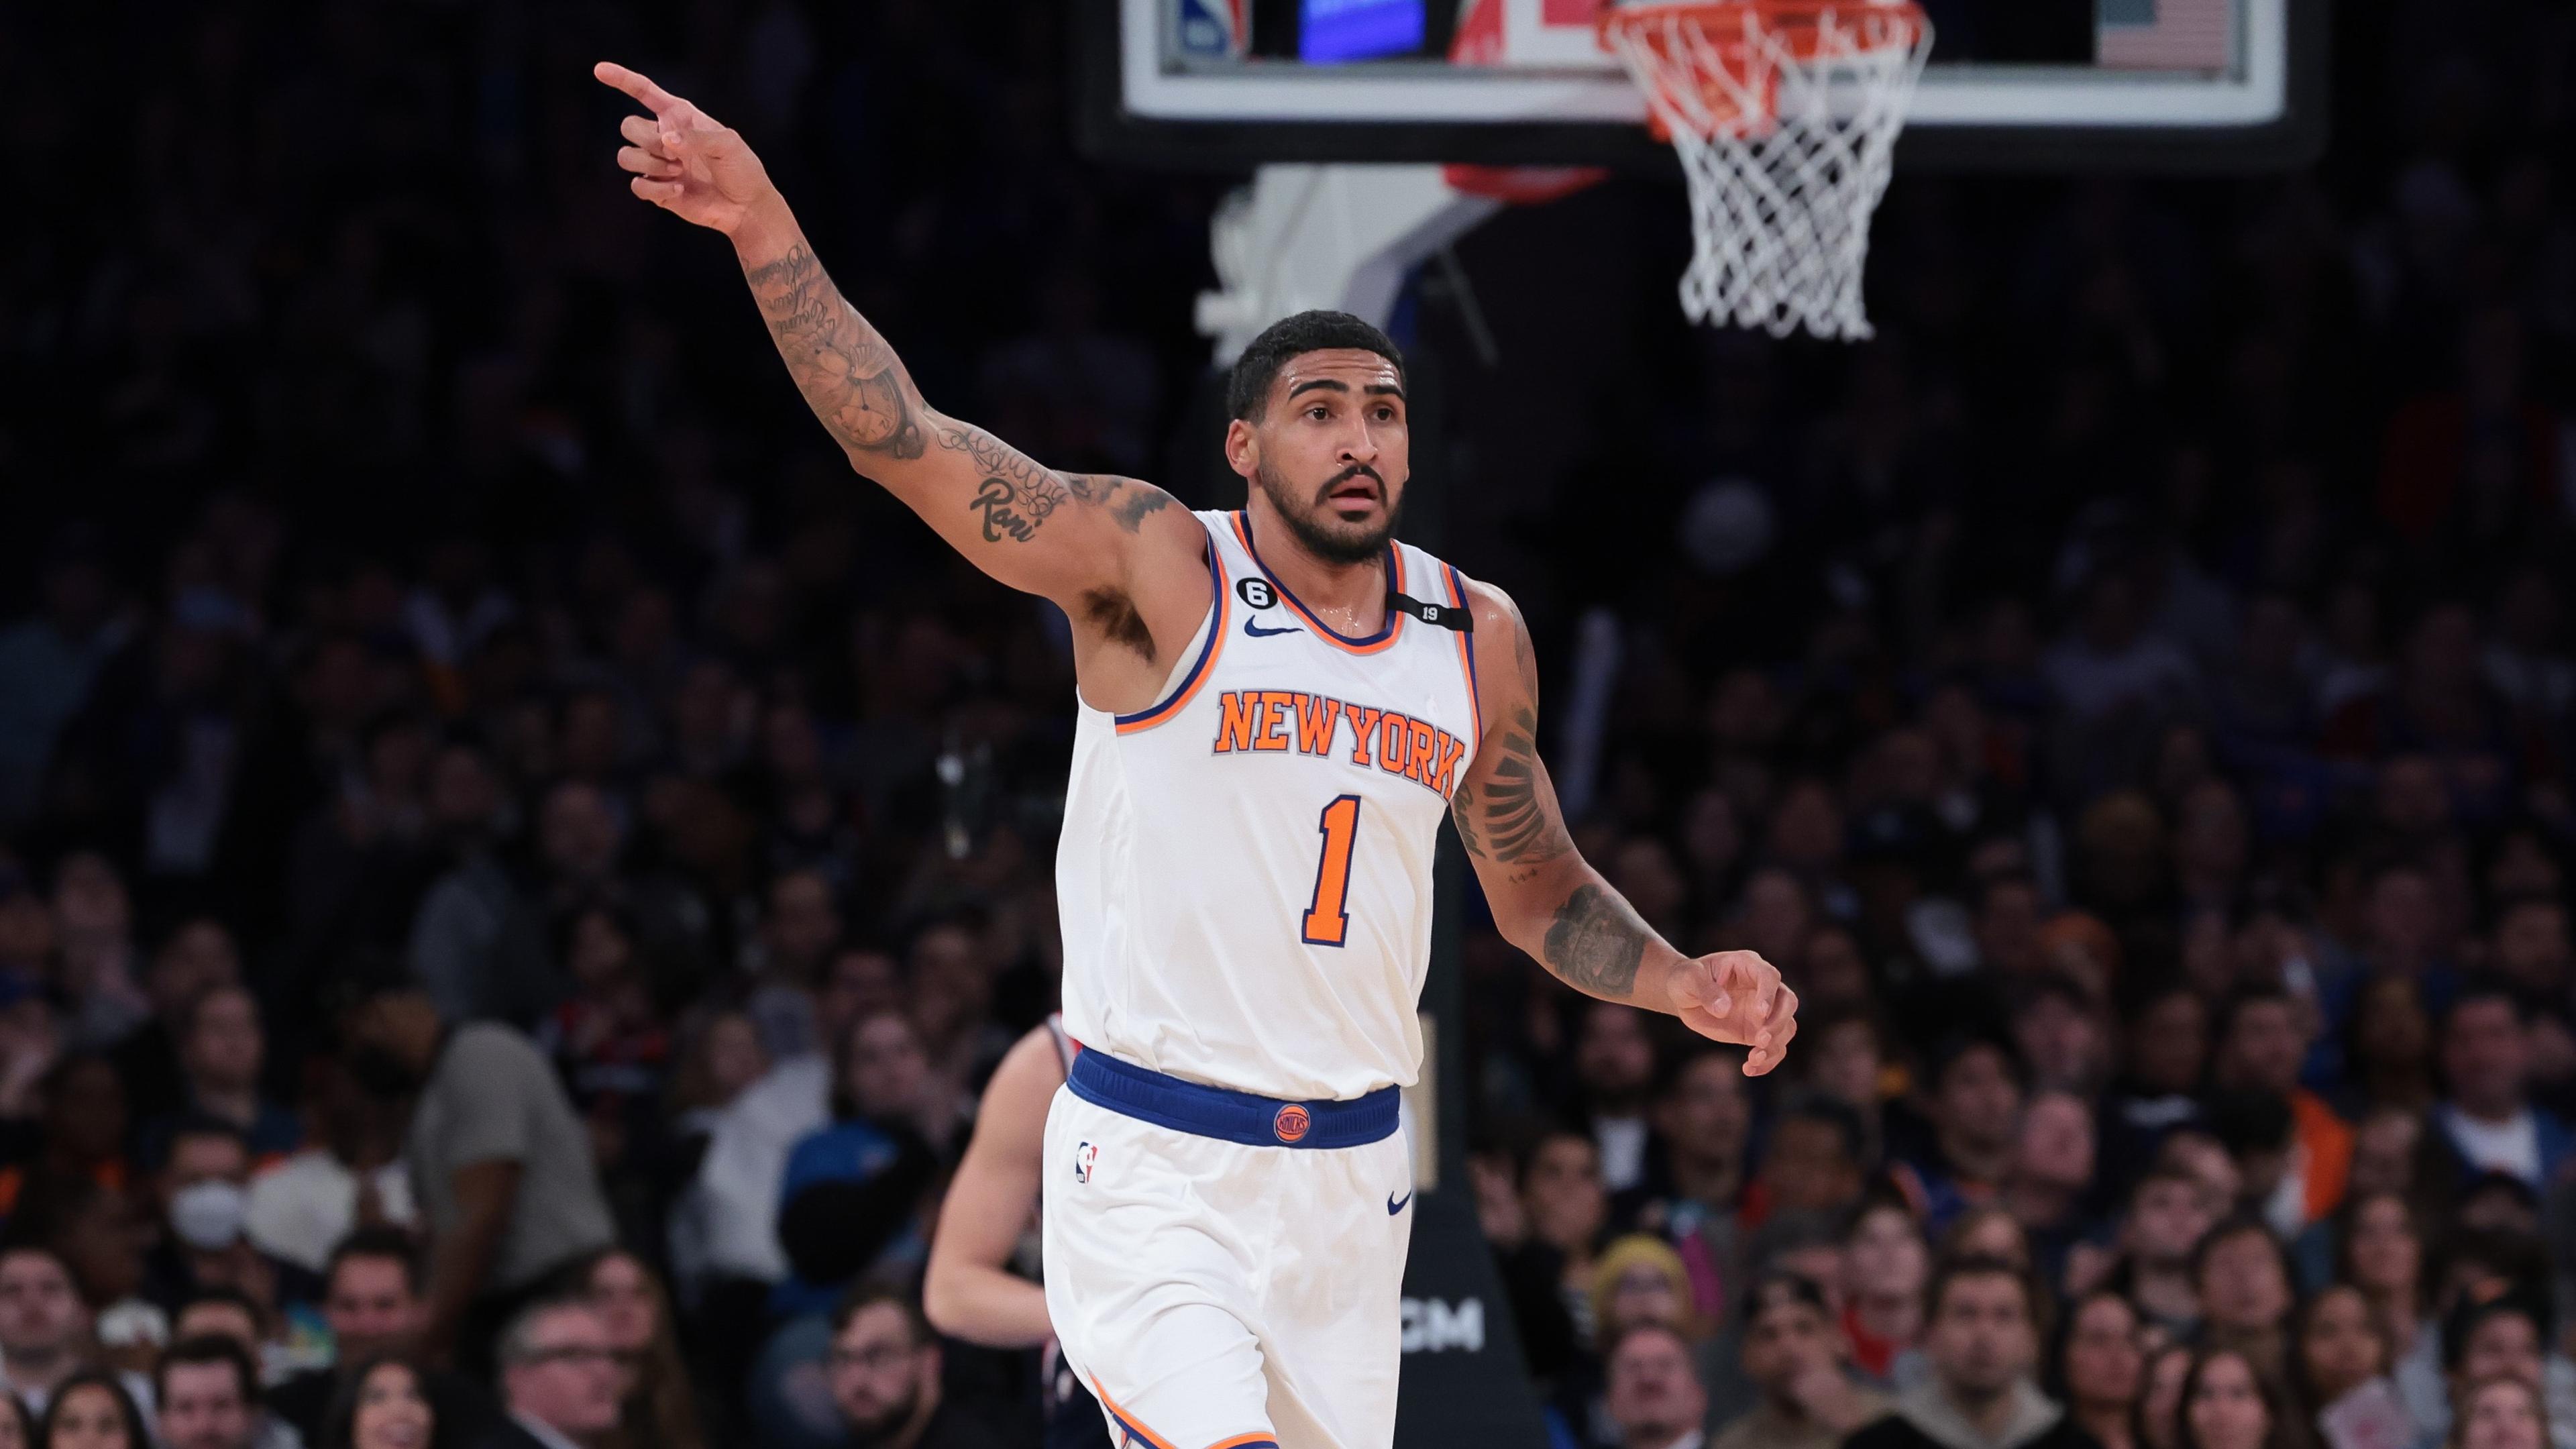 Apr 2, 2023; New York, New York, USA; New York Knicks forward Obi Toppin (1) reacts during the second half against the Washington Wizards at Madison Square Garden. Mandatory Credit: Vincent Carchietta-USA TODAY Sports / © Vincent Carchietta-USA TODAY Sports